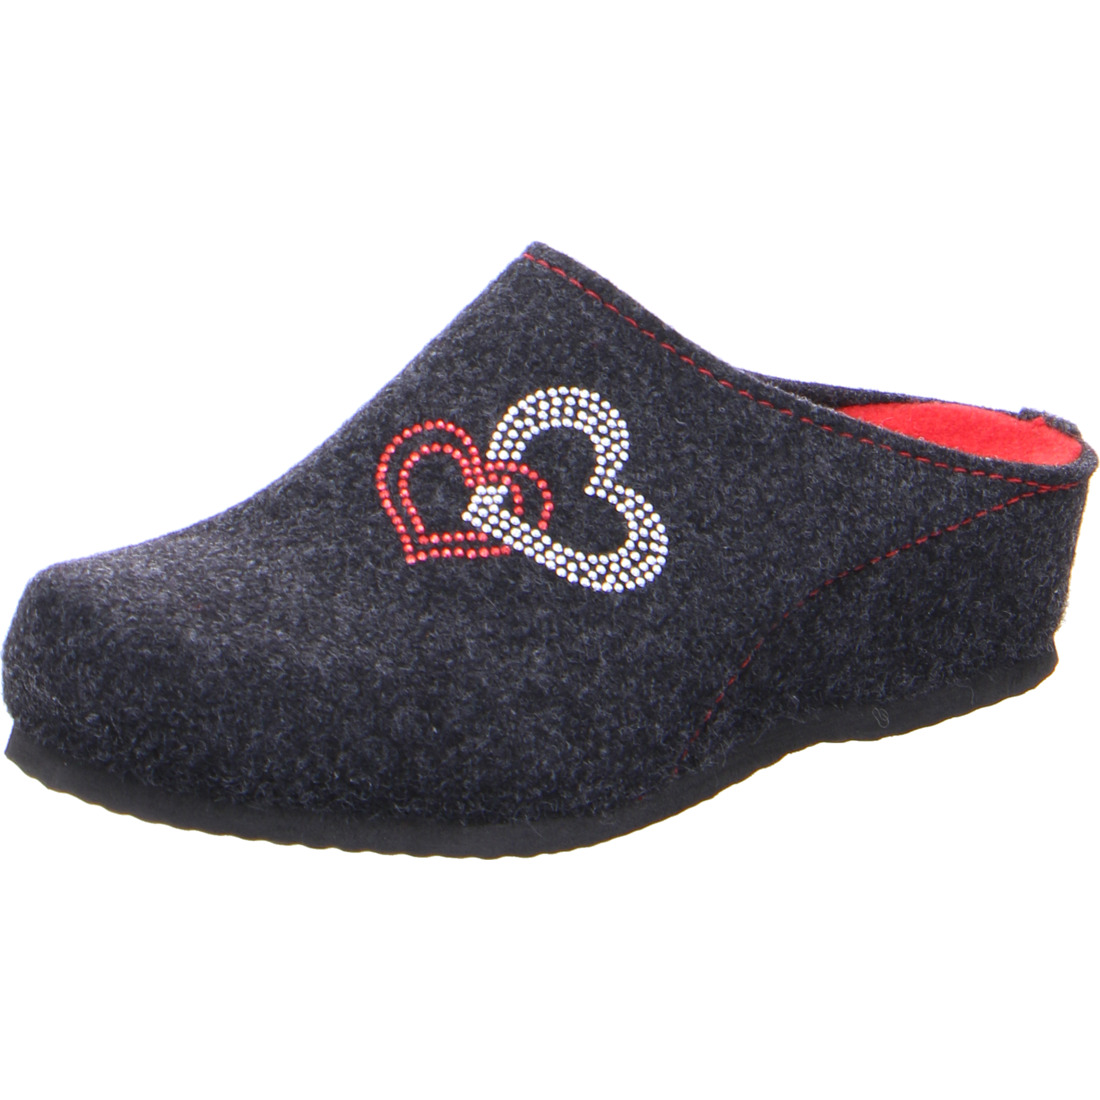 Chaussons*Ara Shoes Chaussons Chaussons Cosy gris